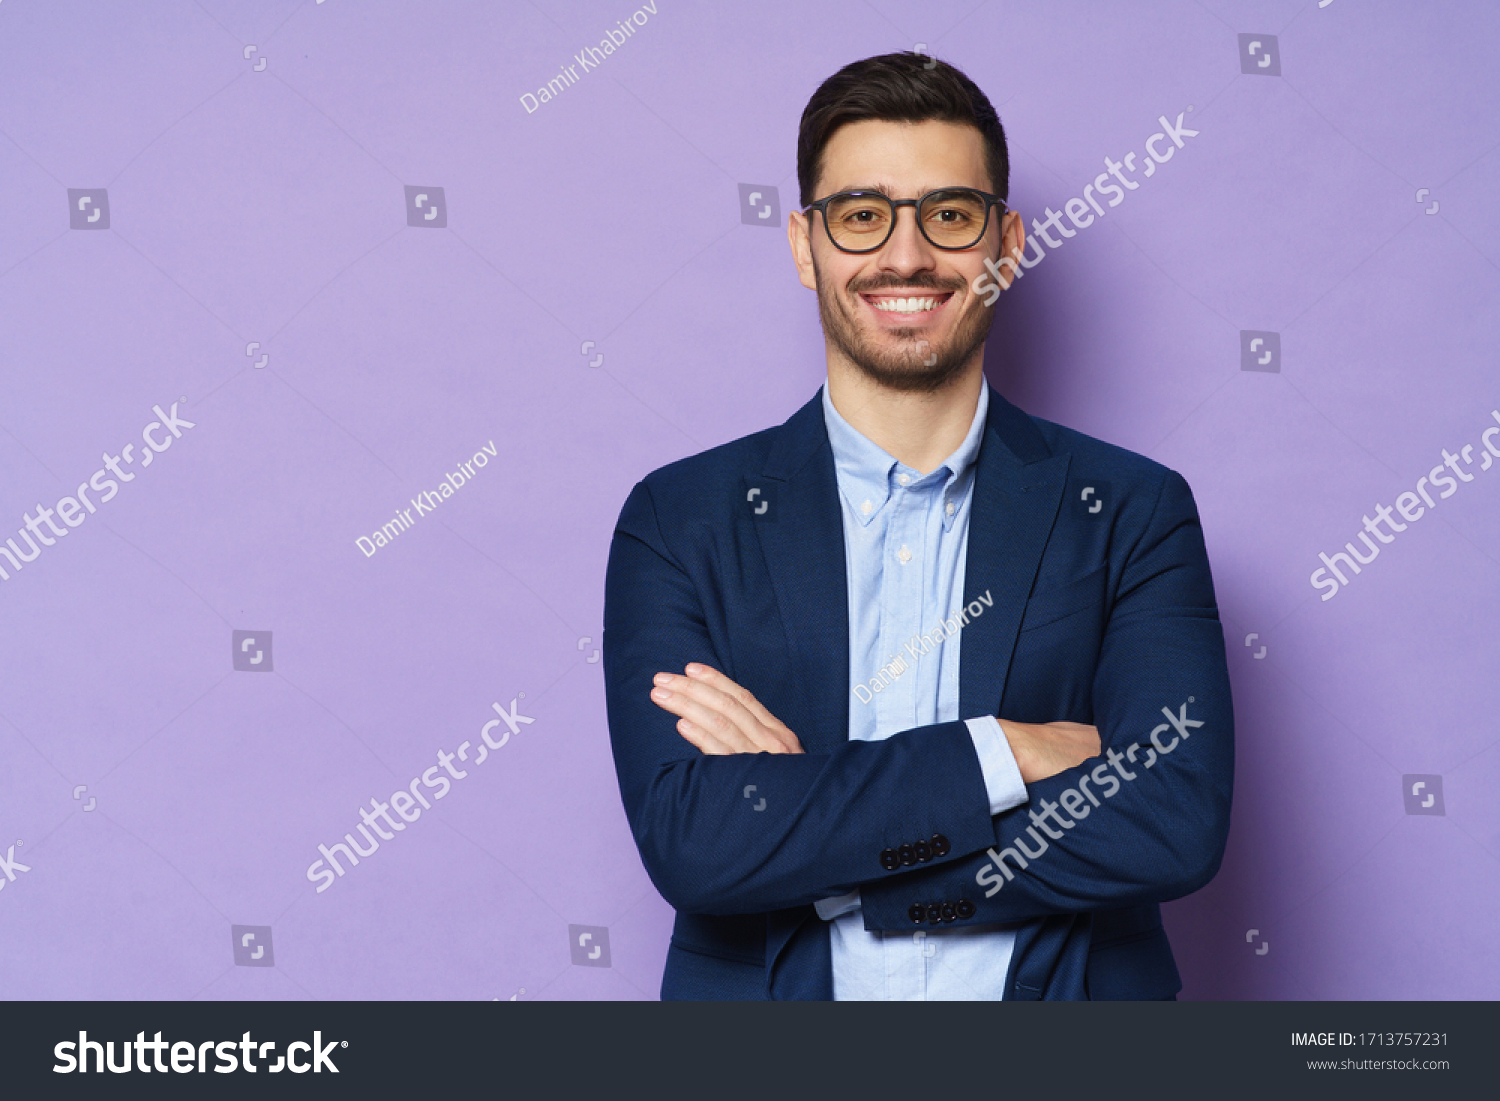 Young buisnessman wearing eyeglasses, jacket and shirt, holding arms crossed, looking at camera with happy confident smile, standing against purple background #1713757231